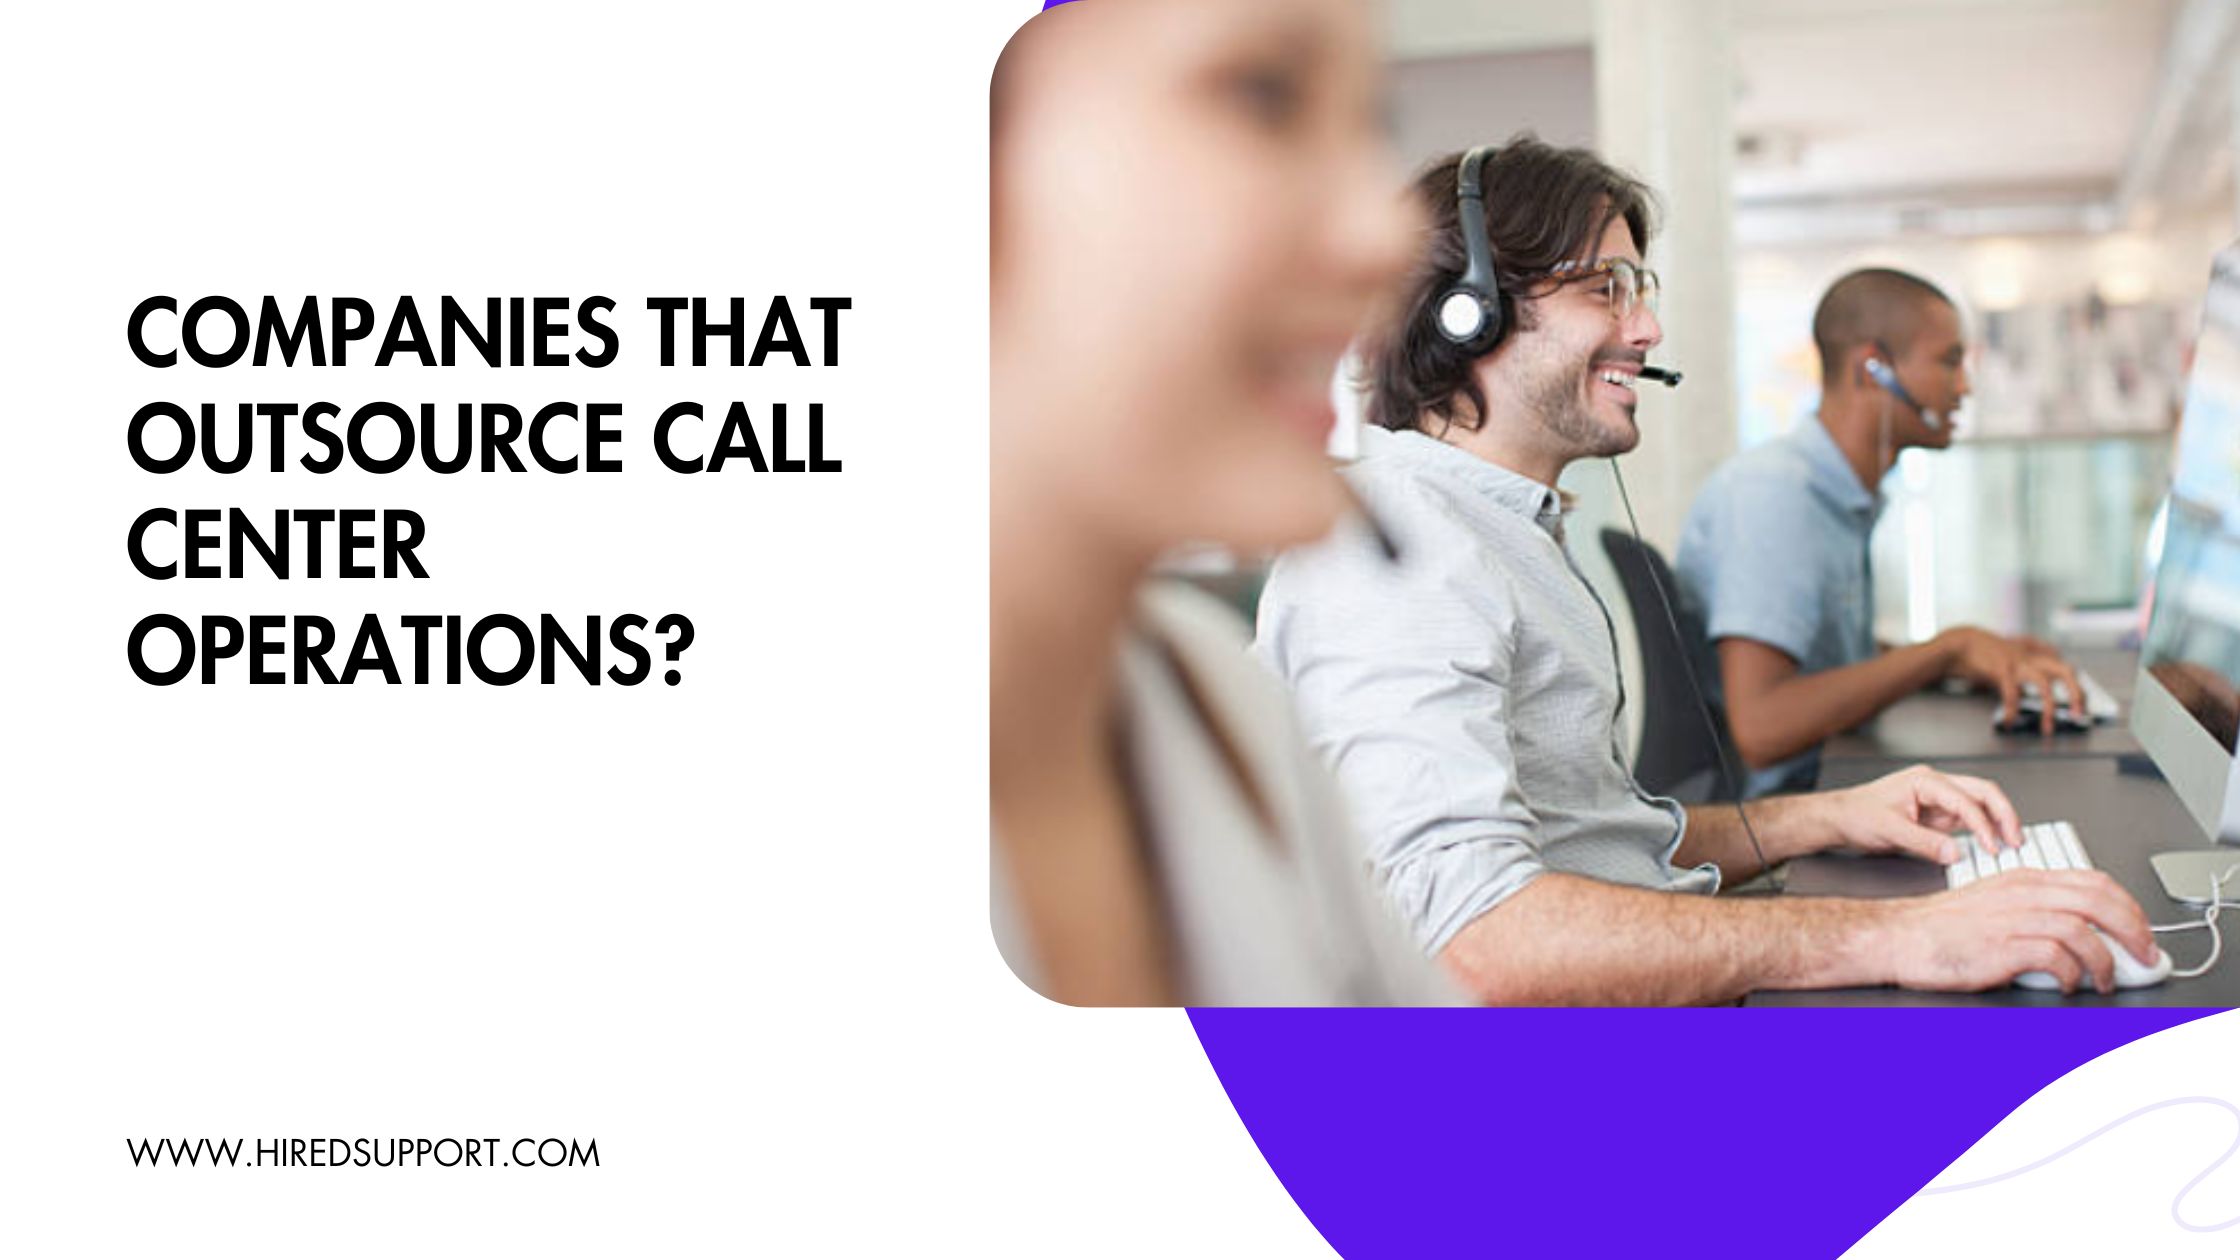 Companies that Outsource Call Center Operations?